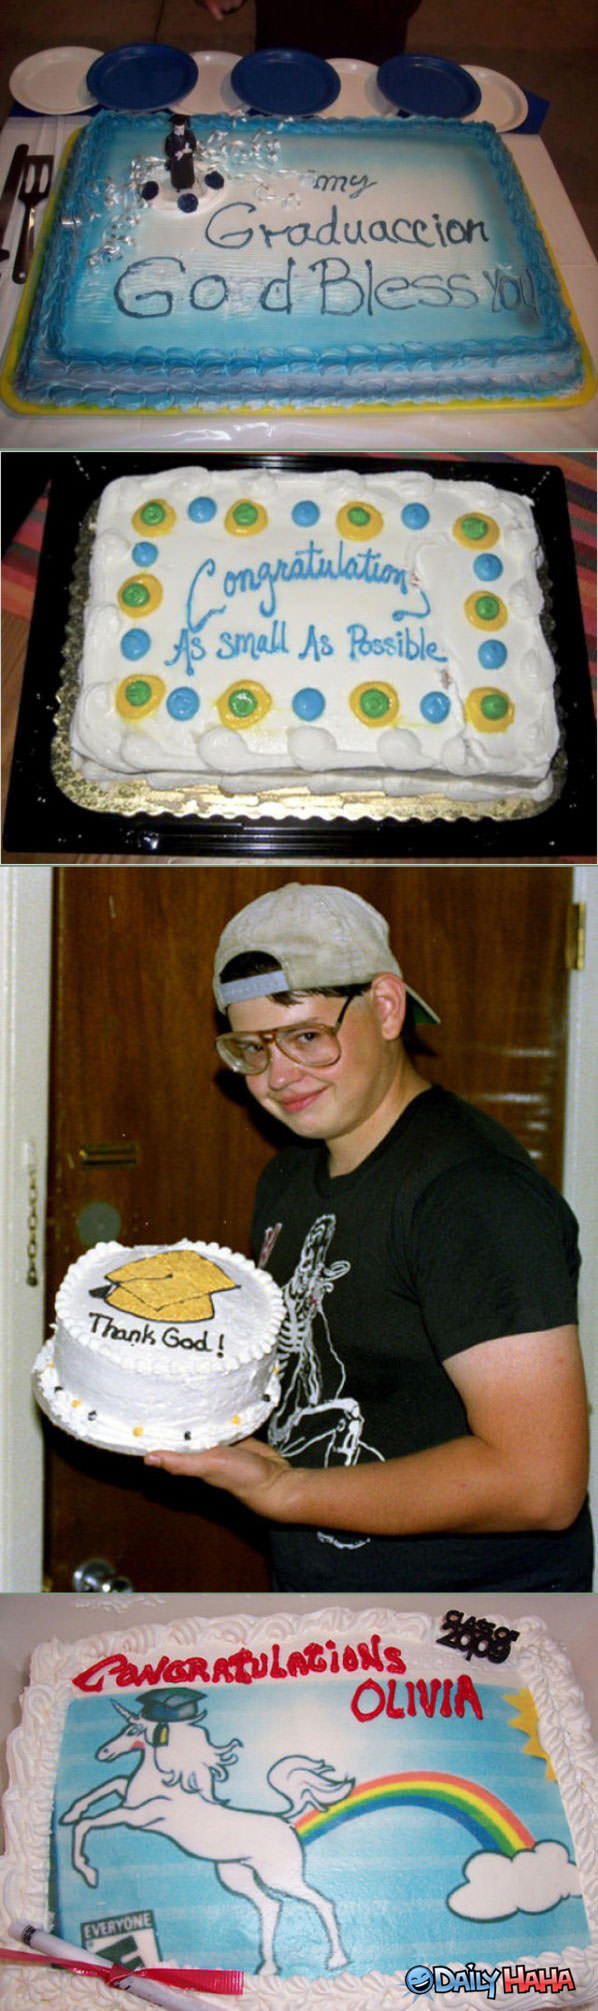 Funny Graduation Cakes funny picture